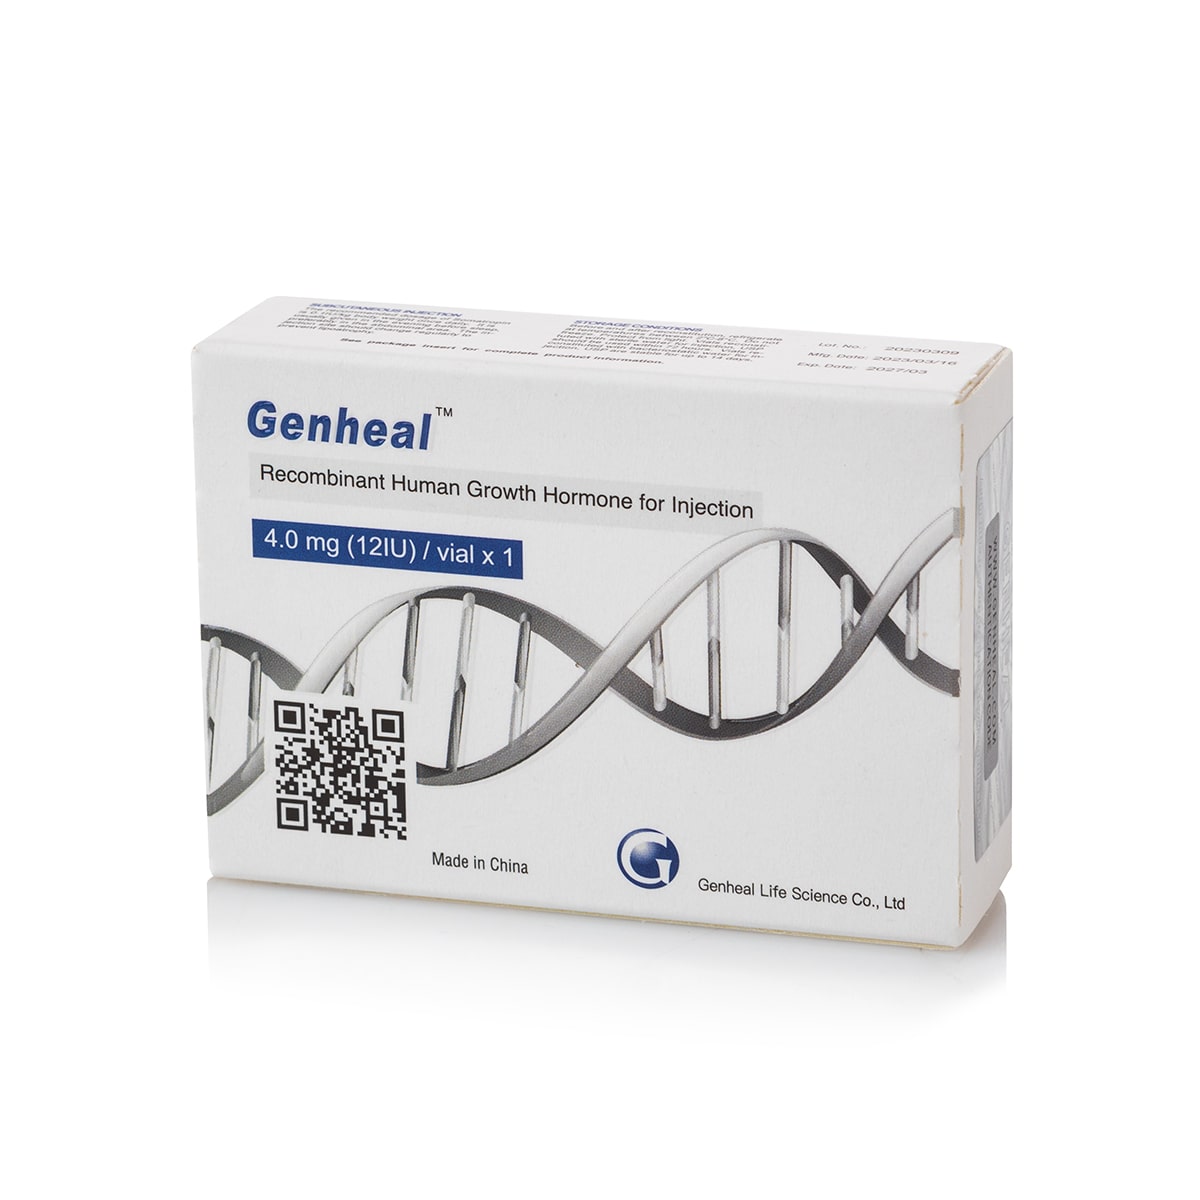 RHGH (Recombinant Human Growth Hormone for Injection) 12 IU 4 мг.